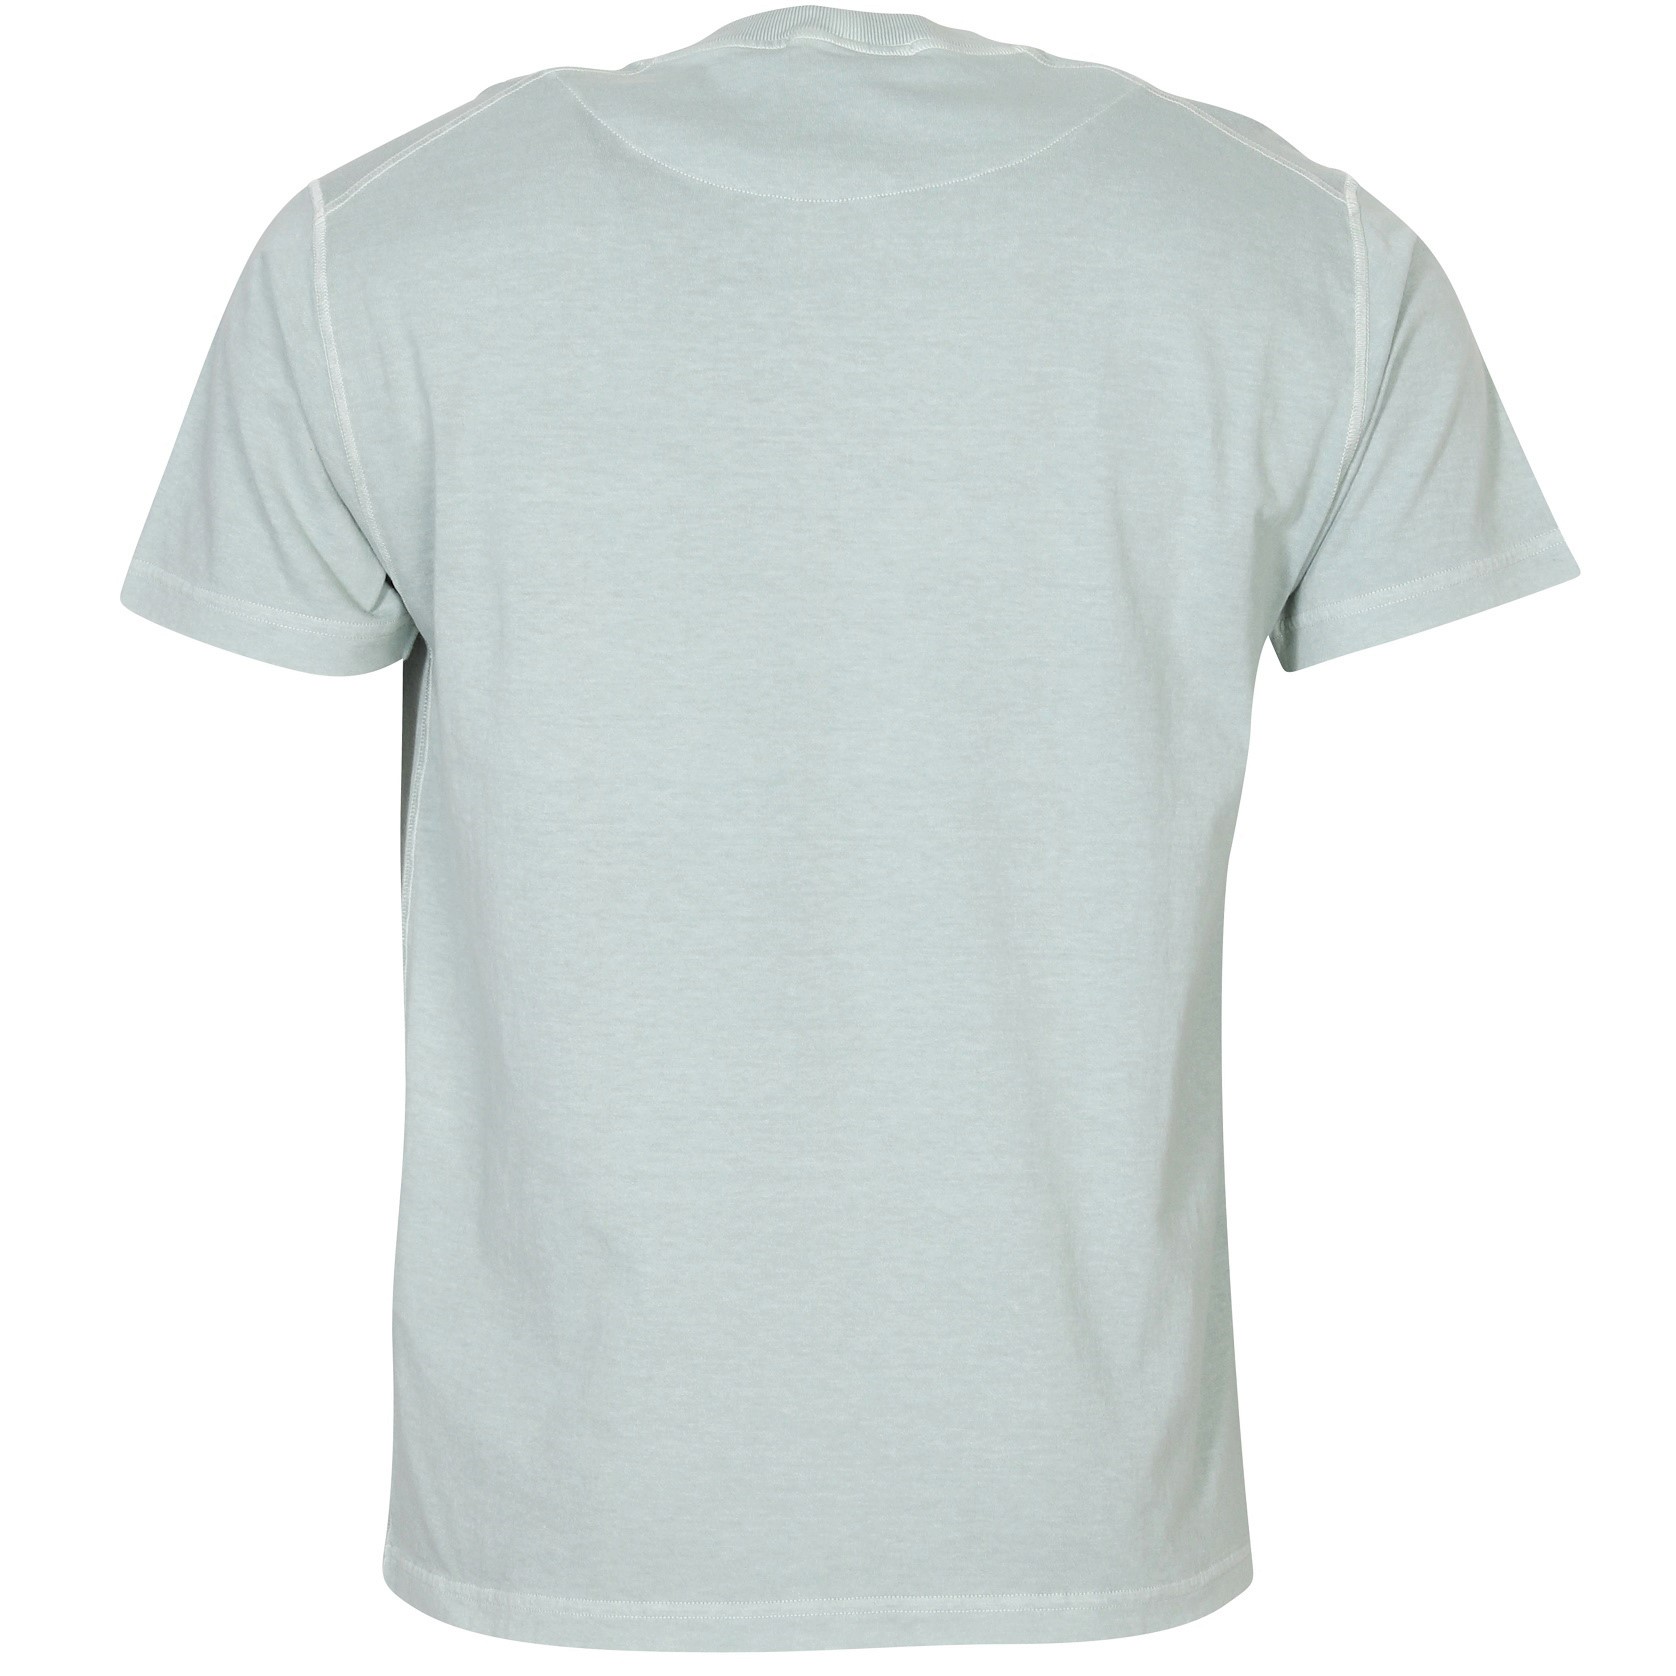 STONE ISLAND Pocket T-Shirt in Washed Sky Blue L